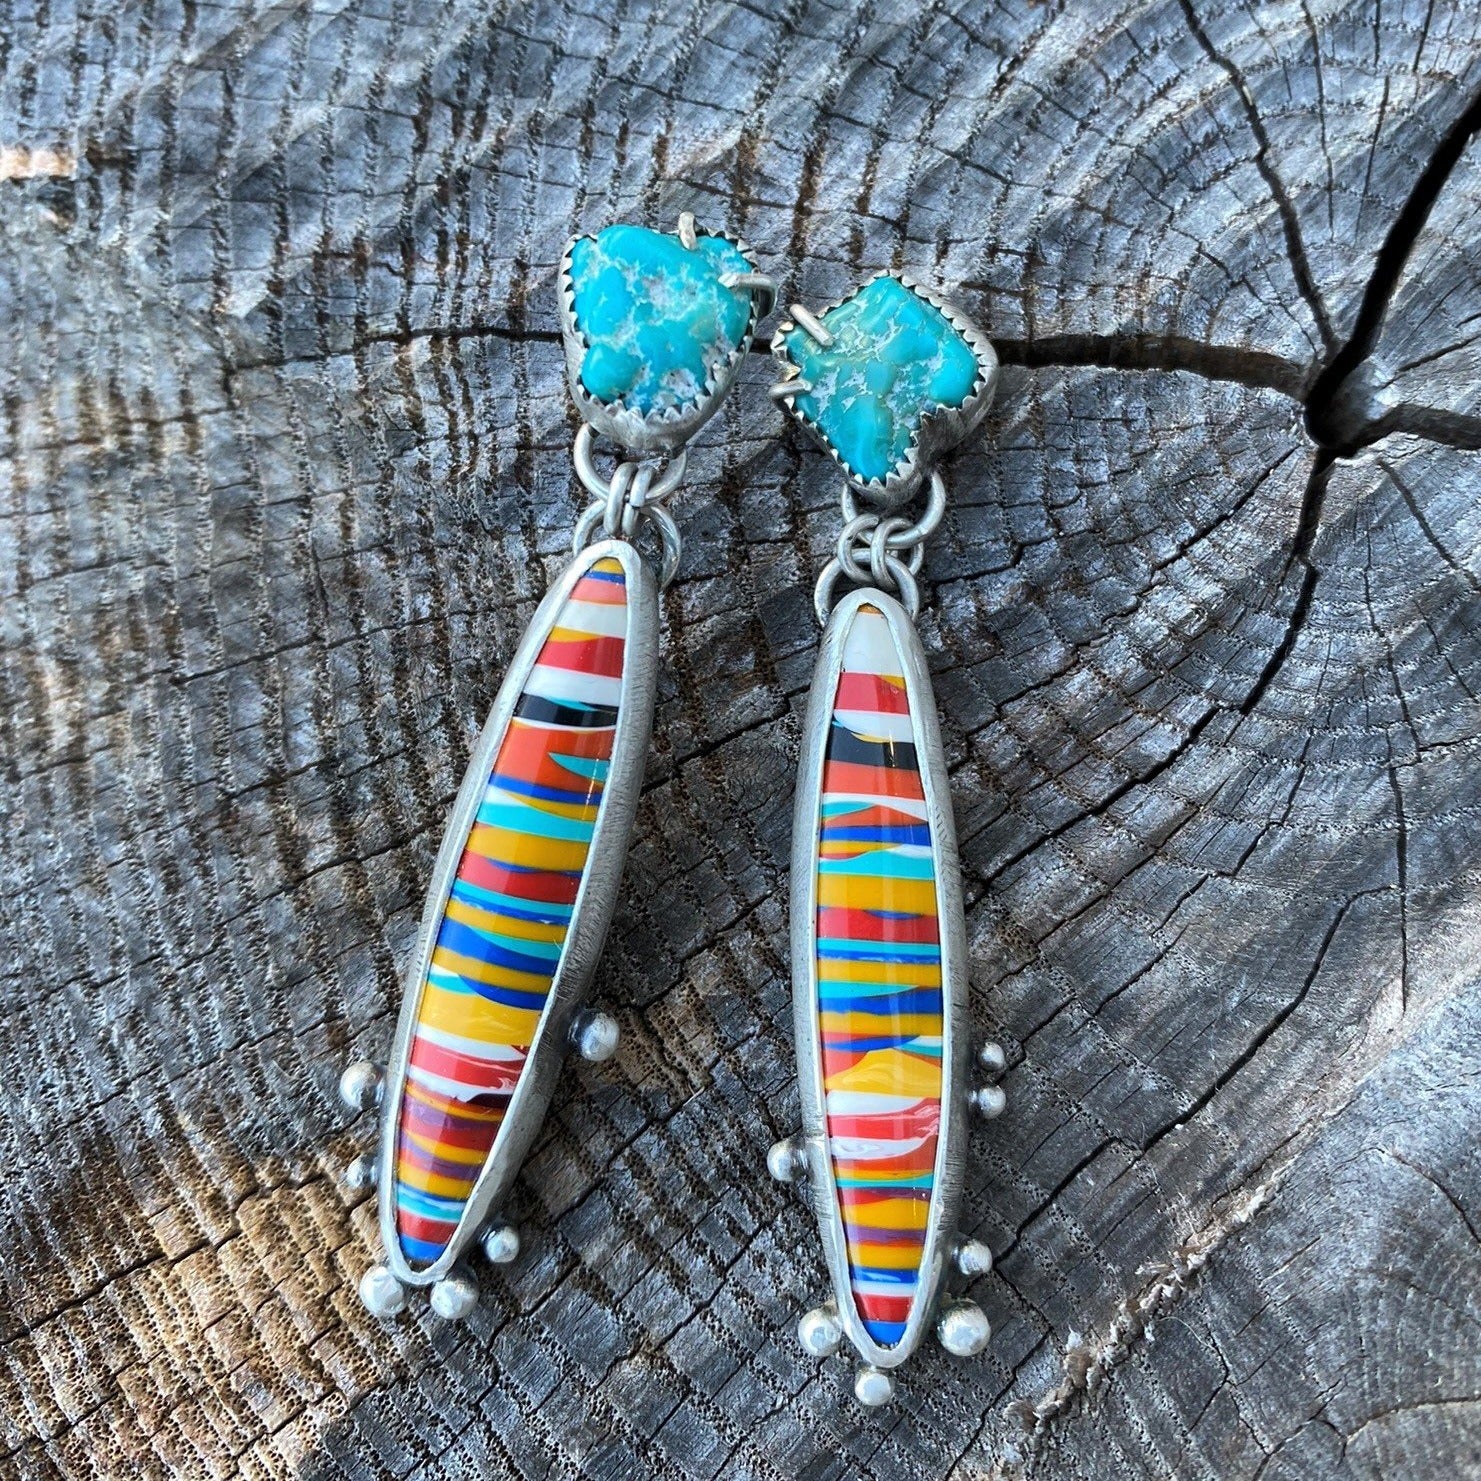 Candelaria Turquoise Nugget & Surfite Earrings